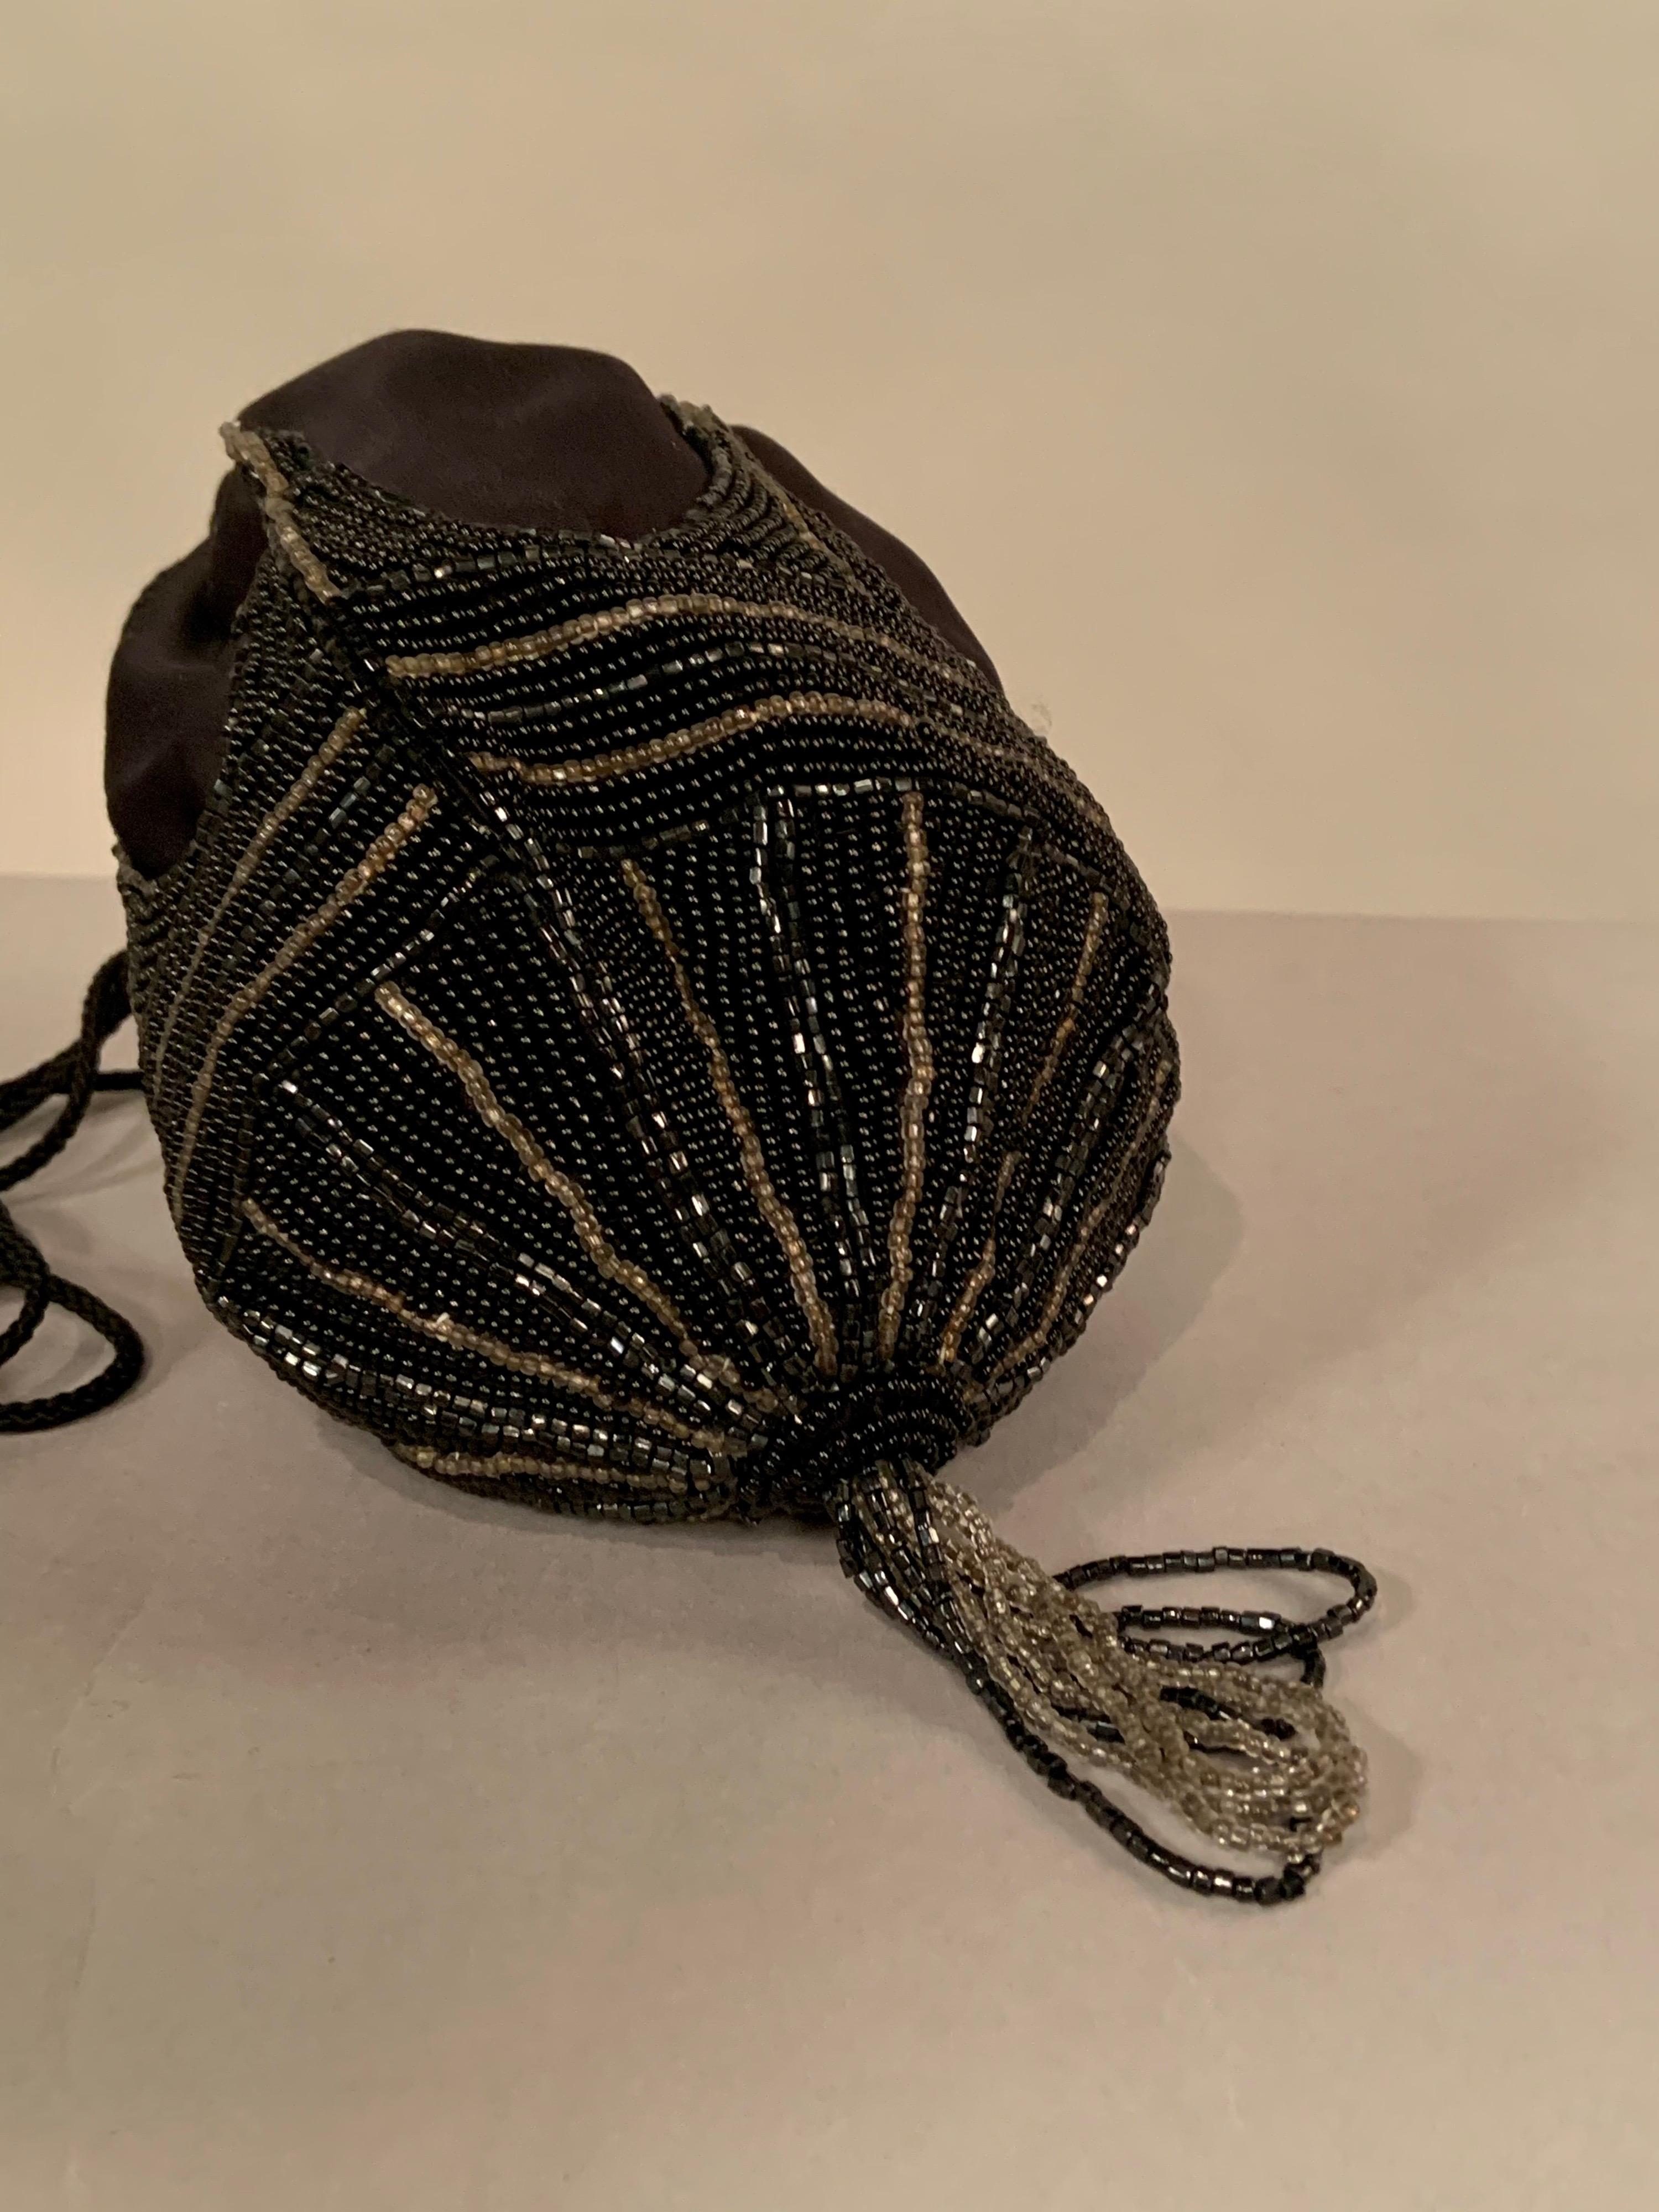 Hand Made in Hong Kong in the 1970's this black satin evening bag has an Art Deco design worked in black and silver caviar beads with a matching beaded tassel.  A woven black cord is used for the drawstring shoulder strap. It is in excellent